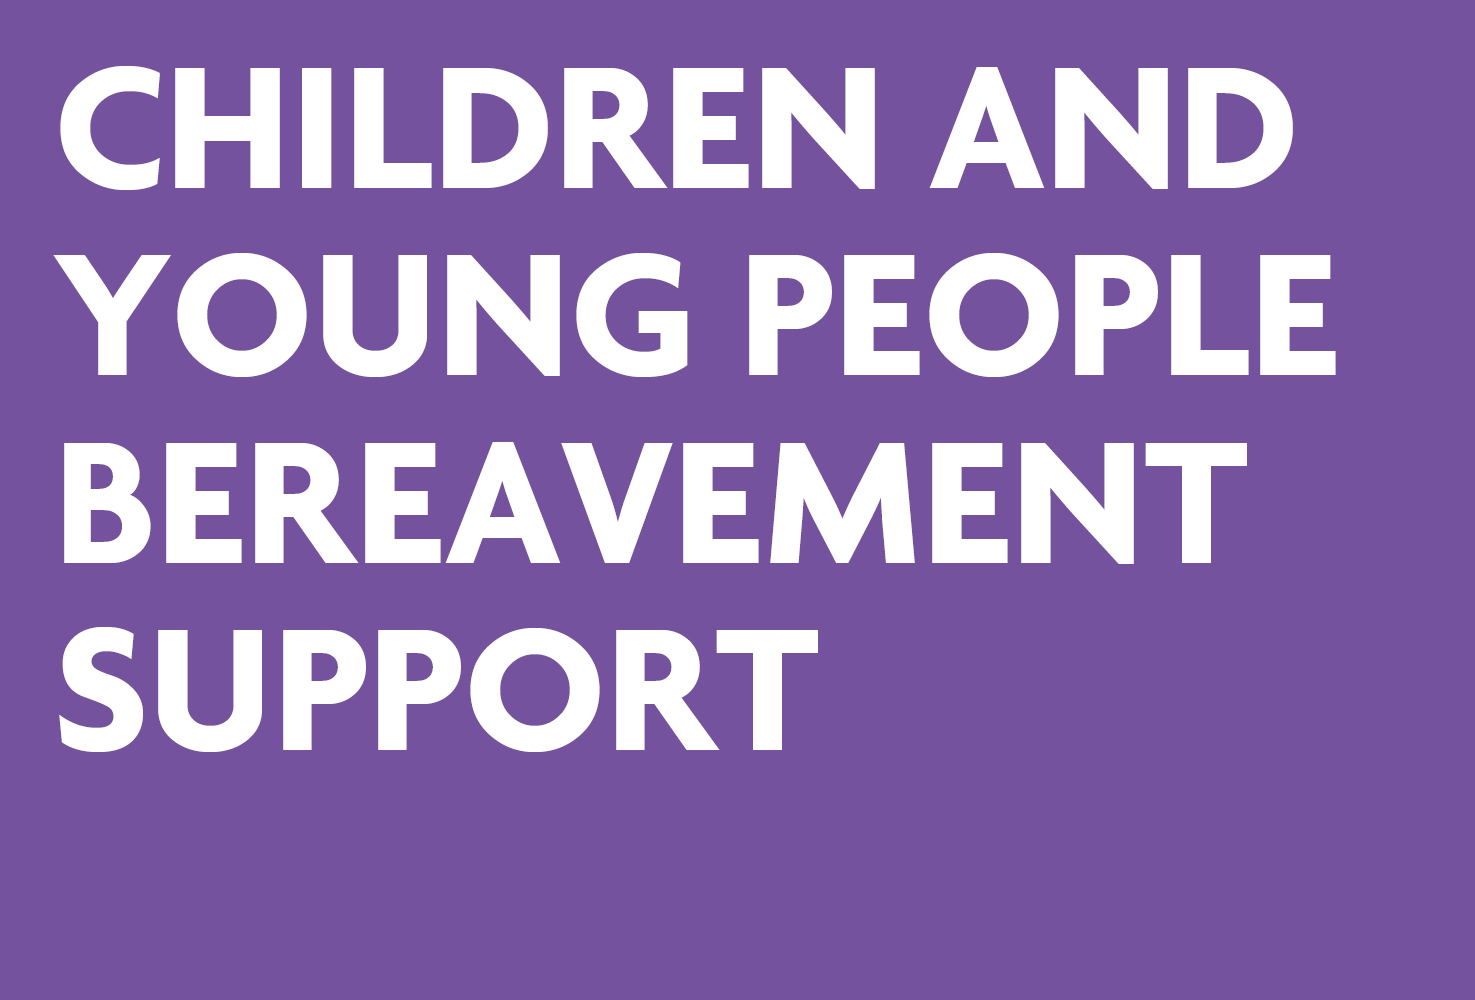 Children and Young People Bereavement SUpport